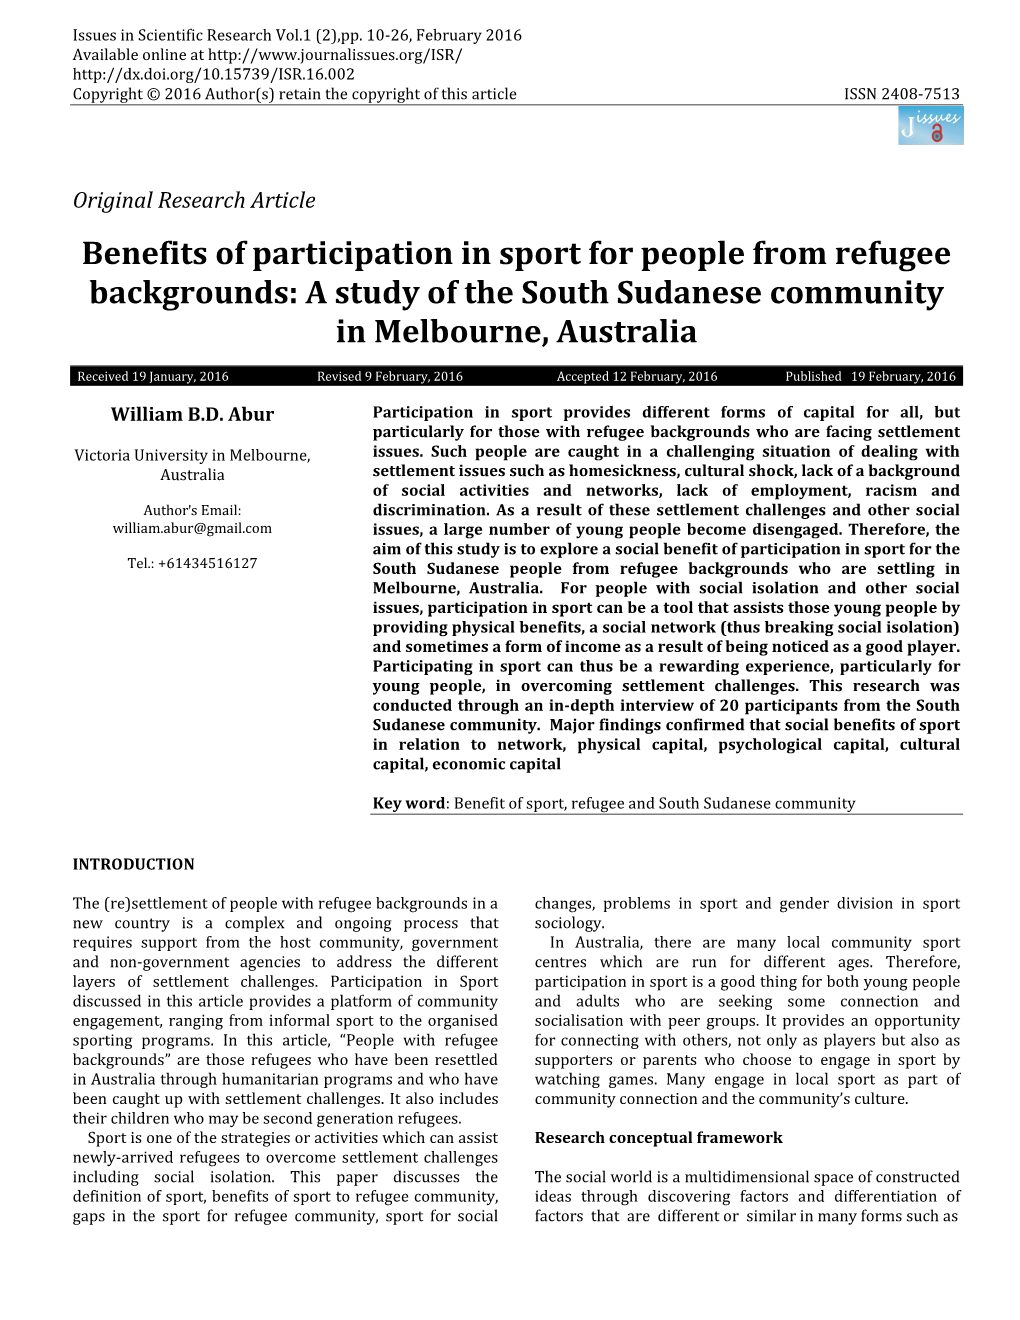 Benefits of Participation in Sport for People from Refugee Backgrounds: a Study of the South Sudanese Community in Melbourne, Australia